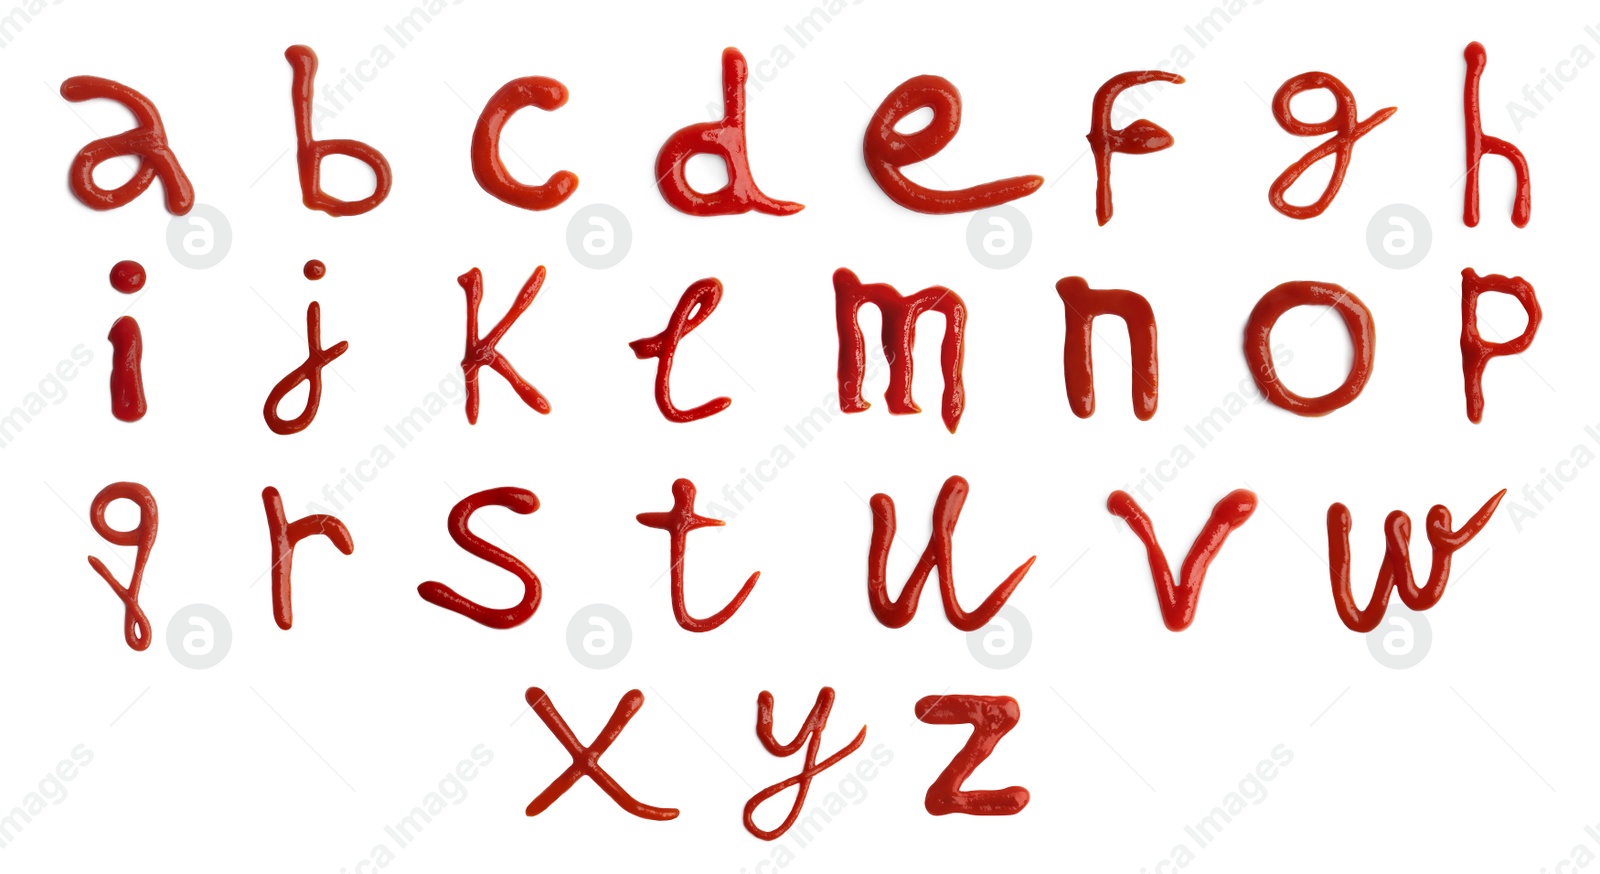 Image of Alphabet made of ketchup on white background